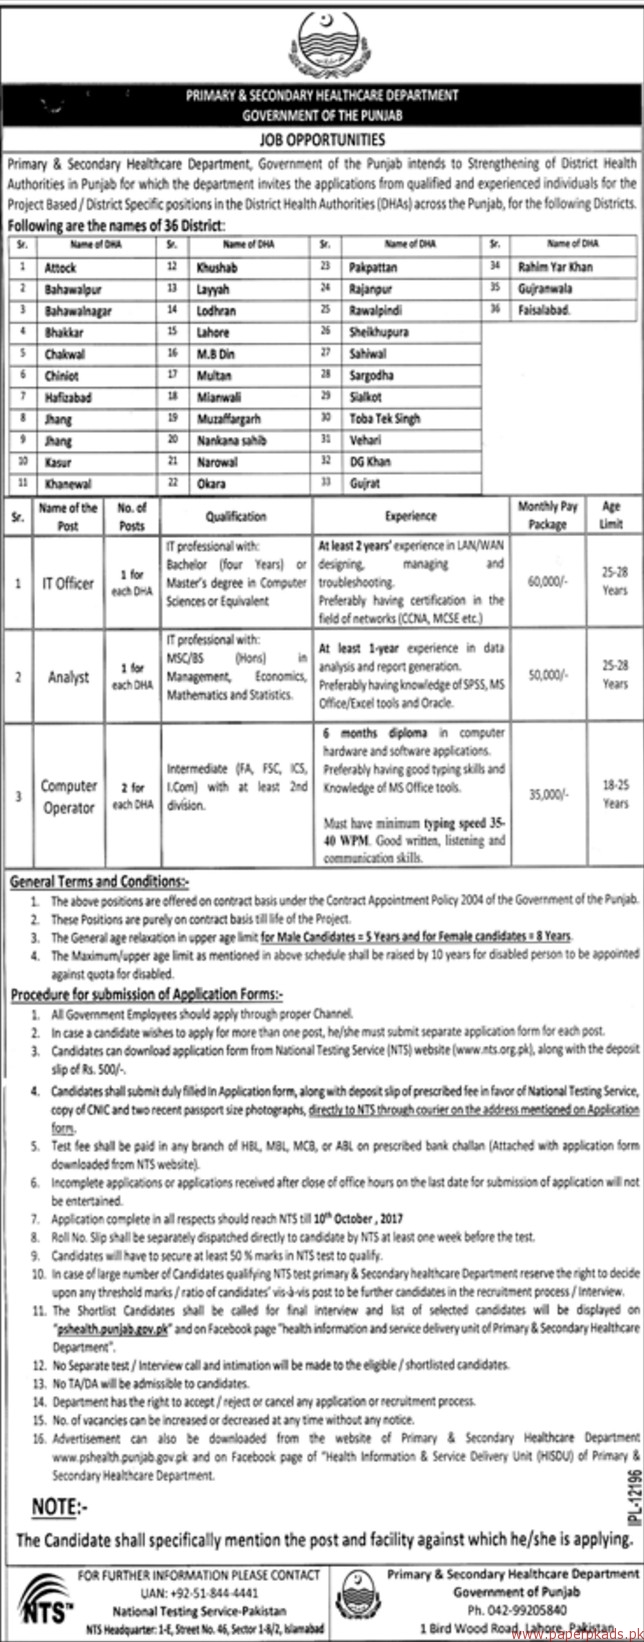 P&S Healthcare Department Punjab Jobs 2017 NTS Application Form for IT Officer, Analyst & Computer Operator